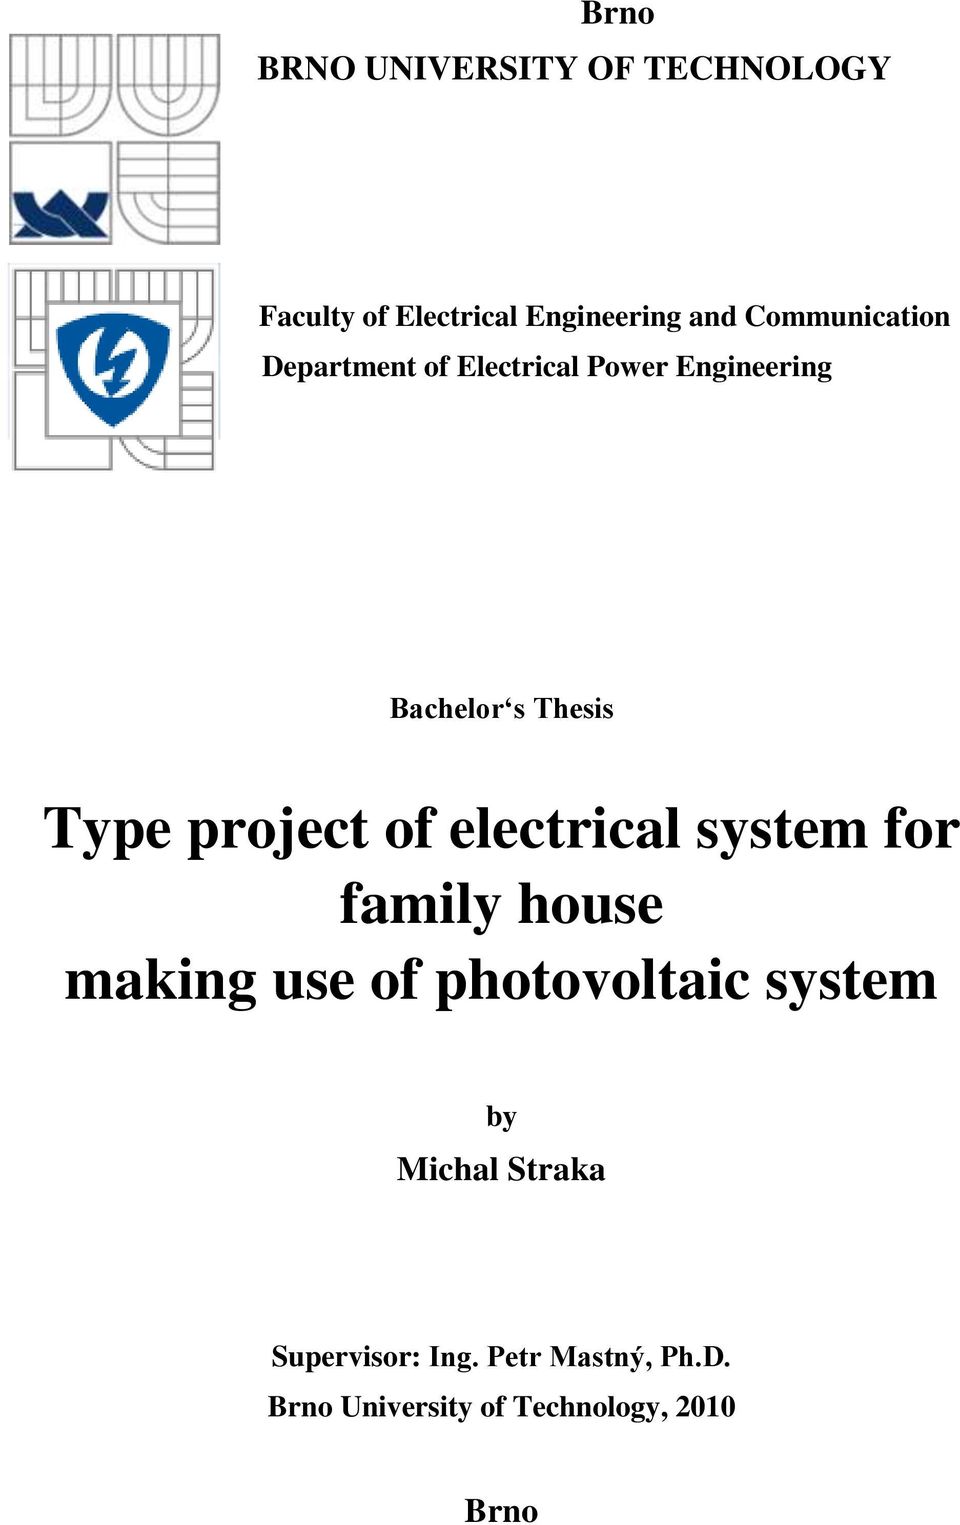 project of electrical system for family house making use of photovoltaic system